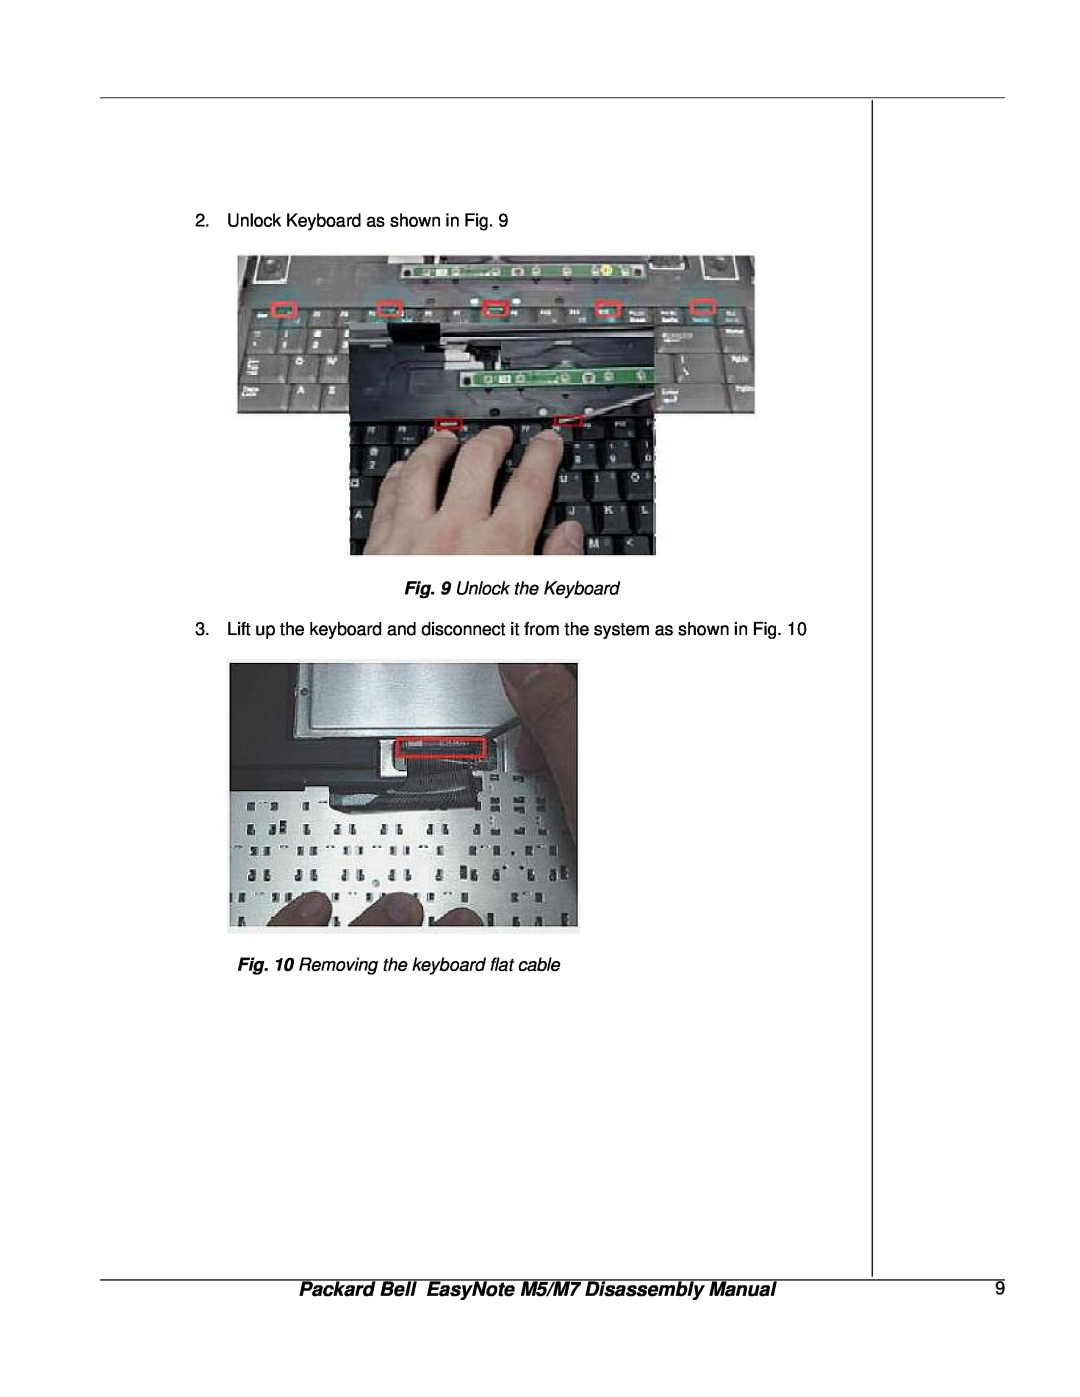 NEC manual Unlock the Keyboard, Removing the keyboard flat cable, Packard Bell EasyNote M5/M7 Disassembly Manual 